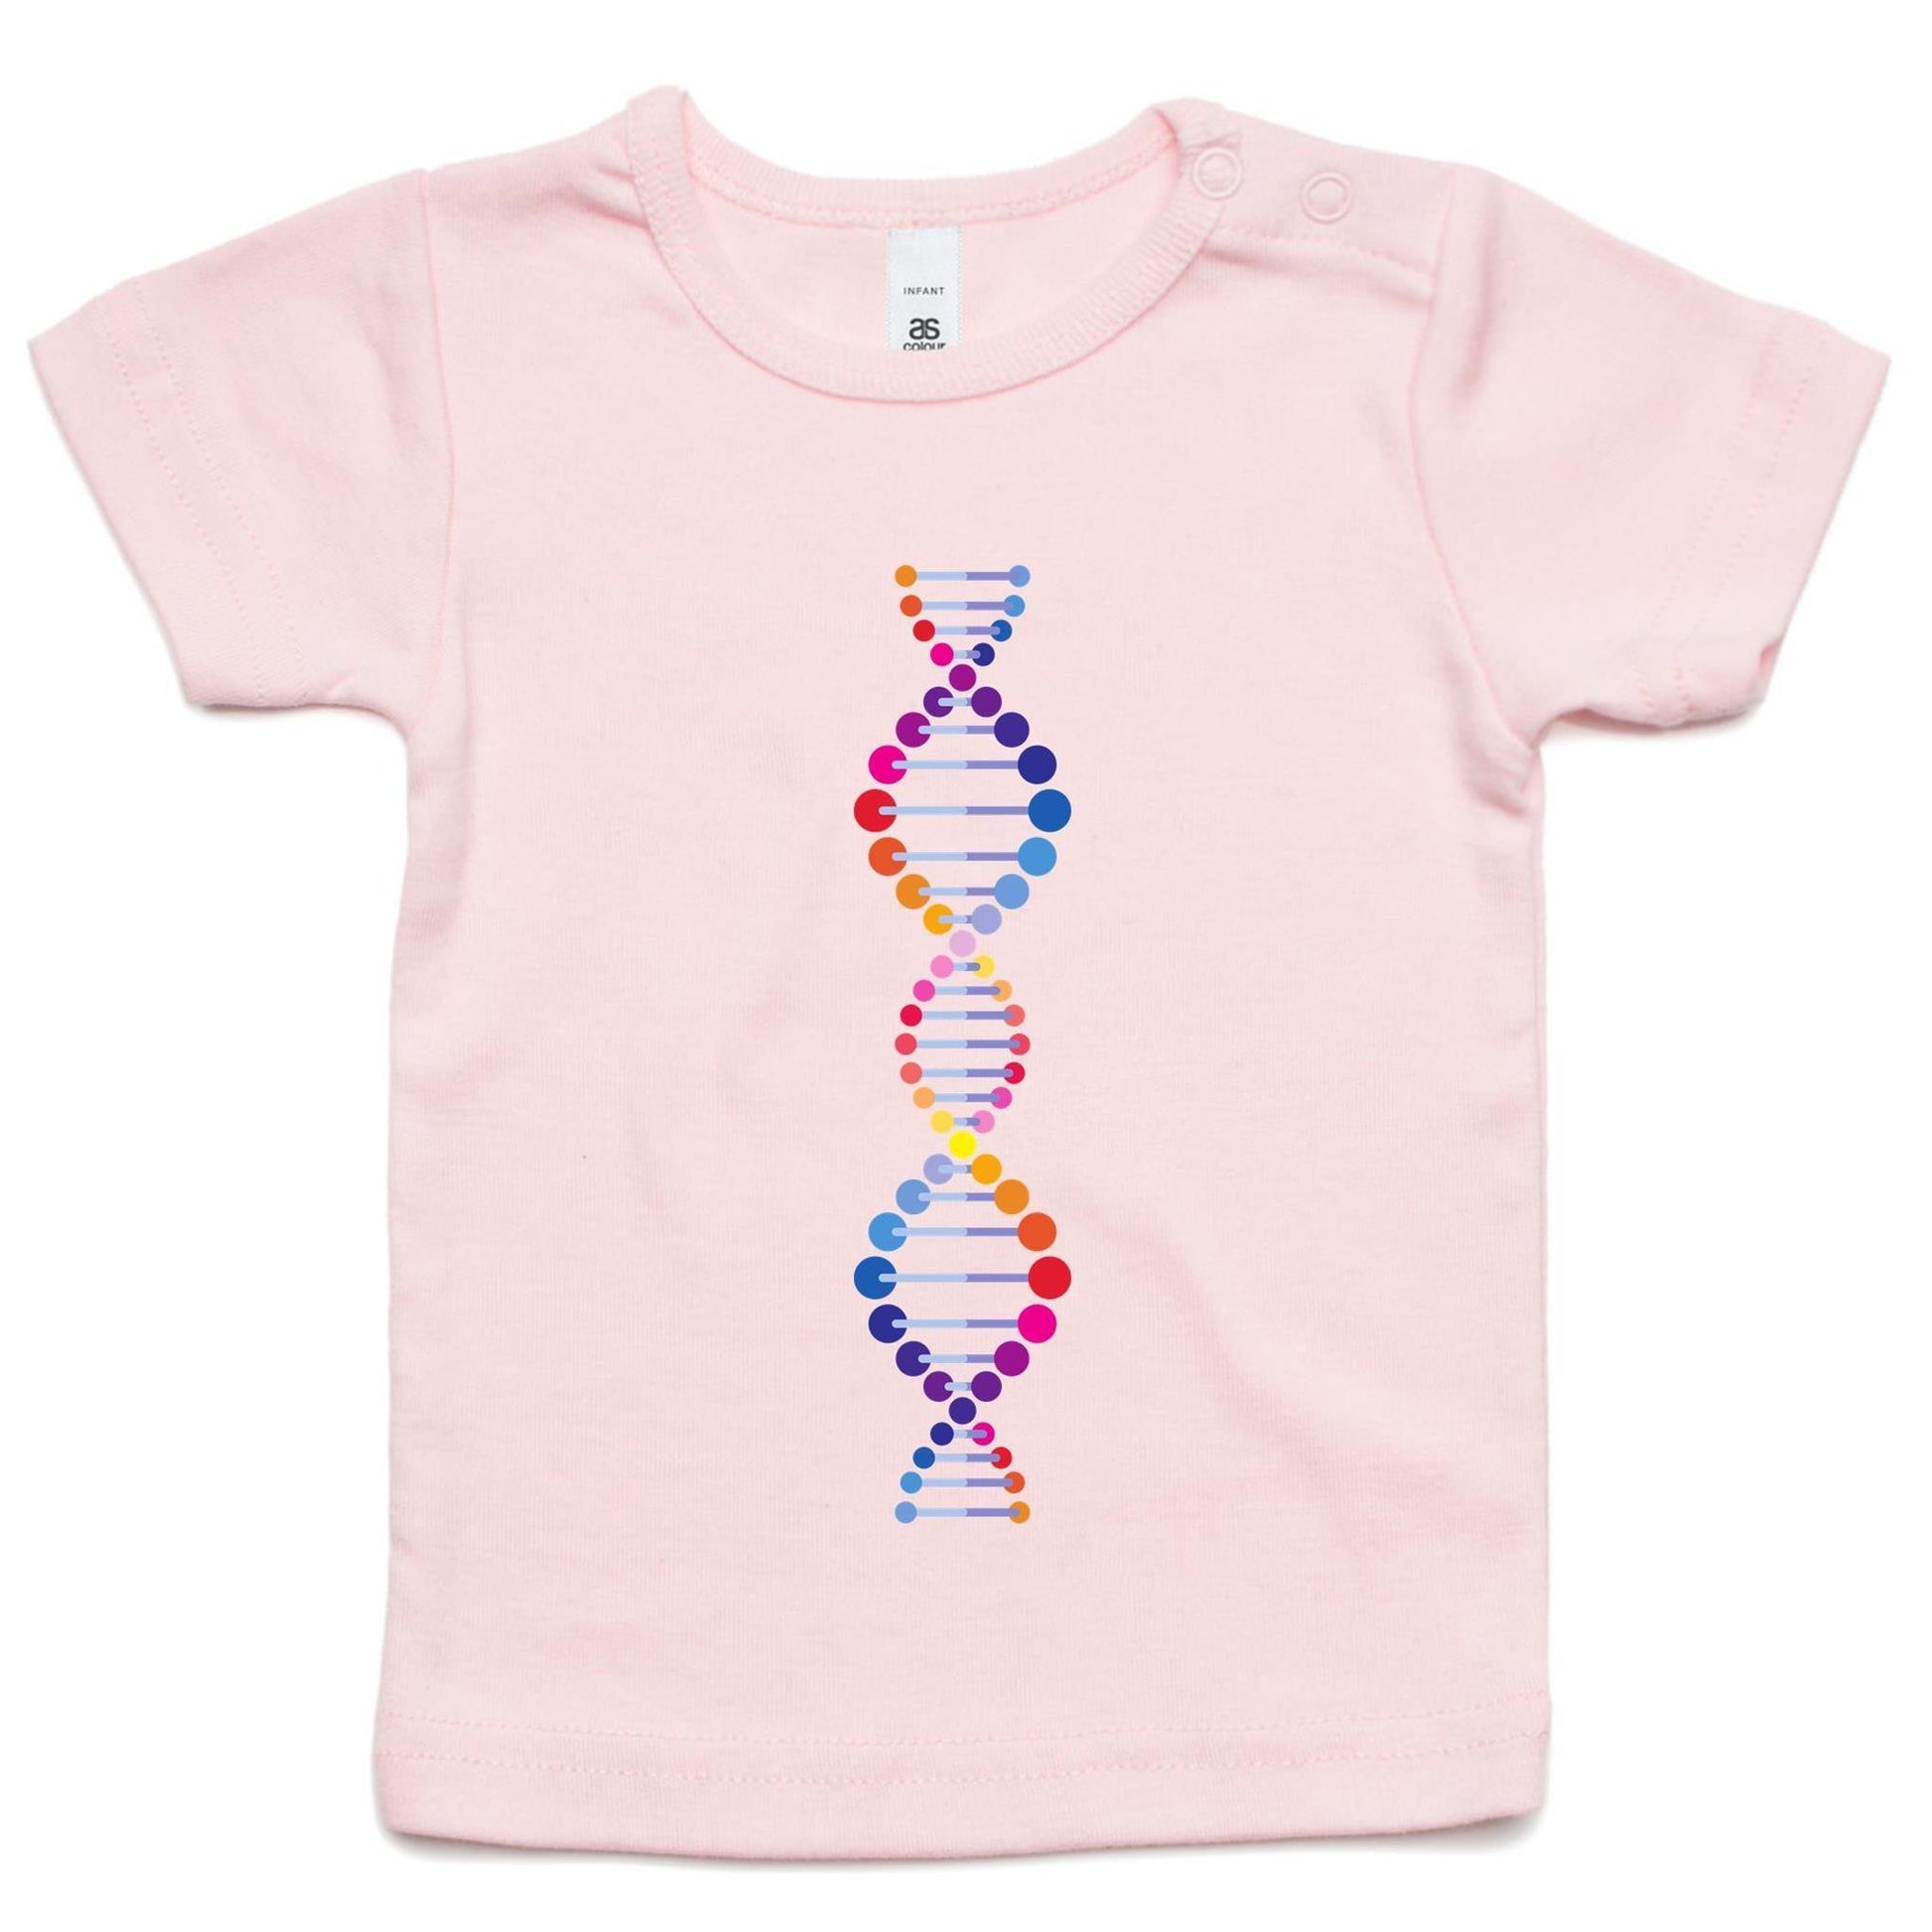 DNA - Baby T-shirt Pink Baby T-shirt kids Science